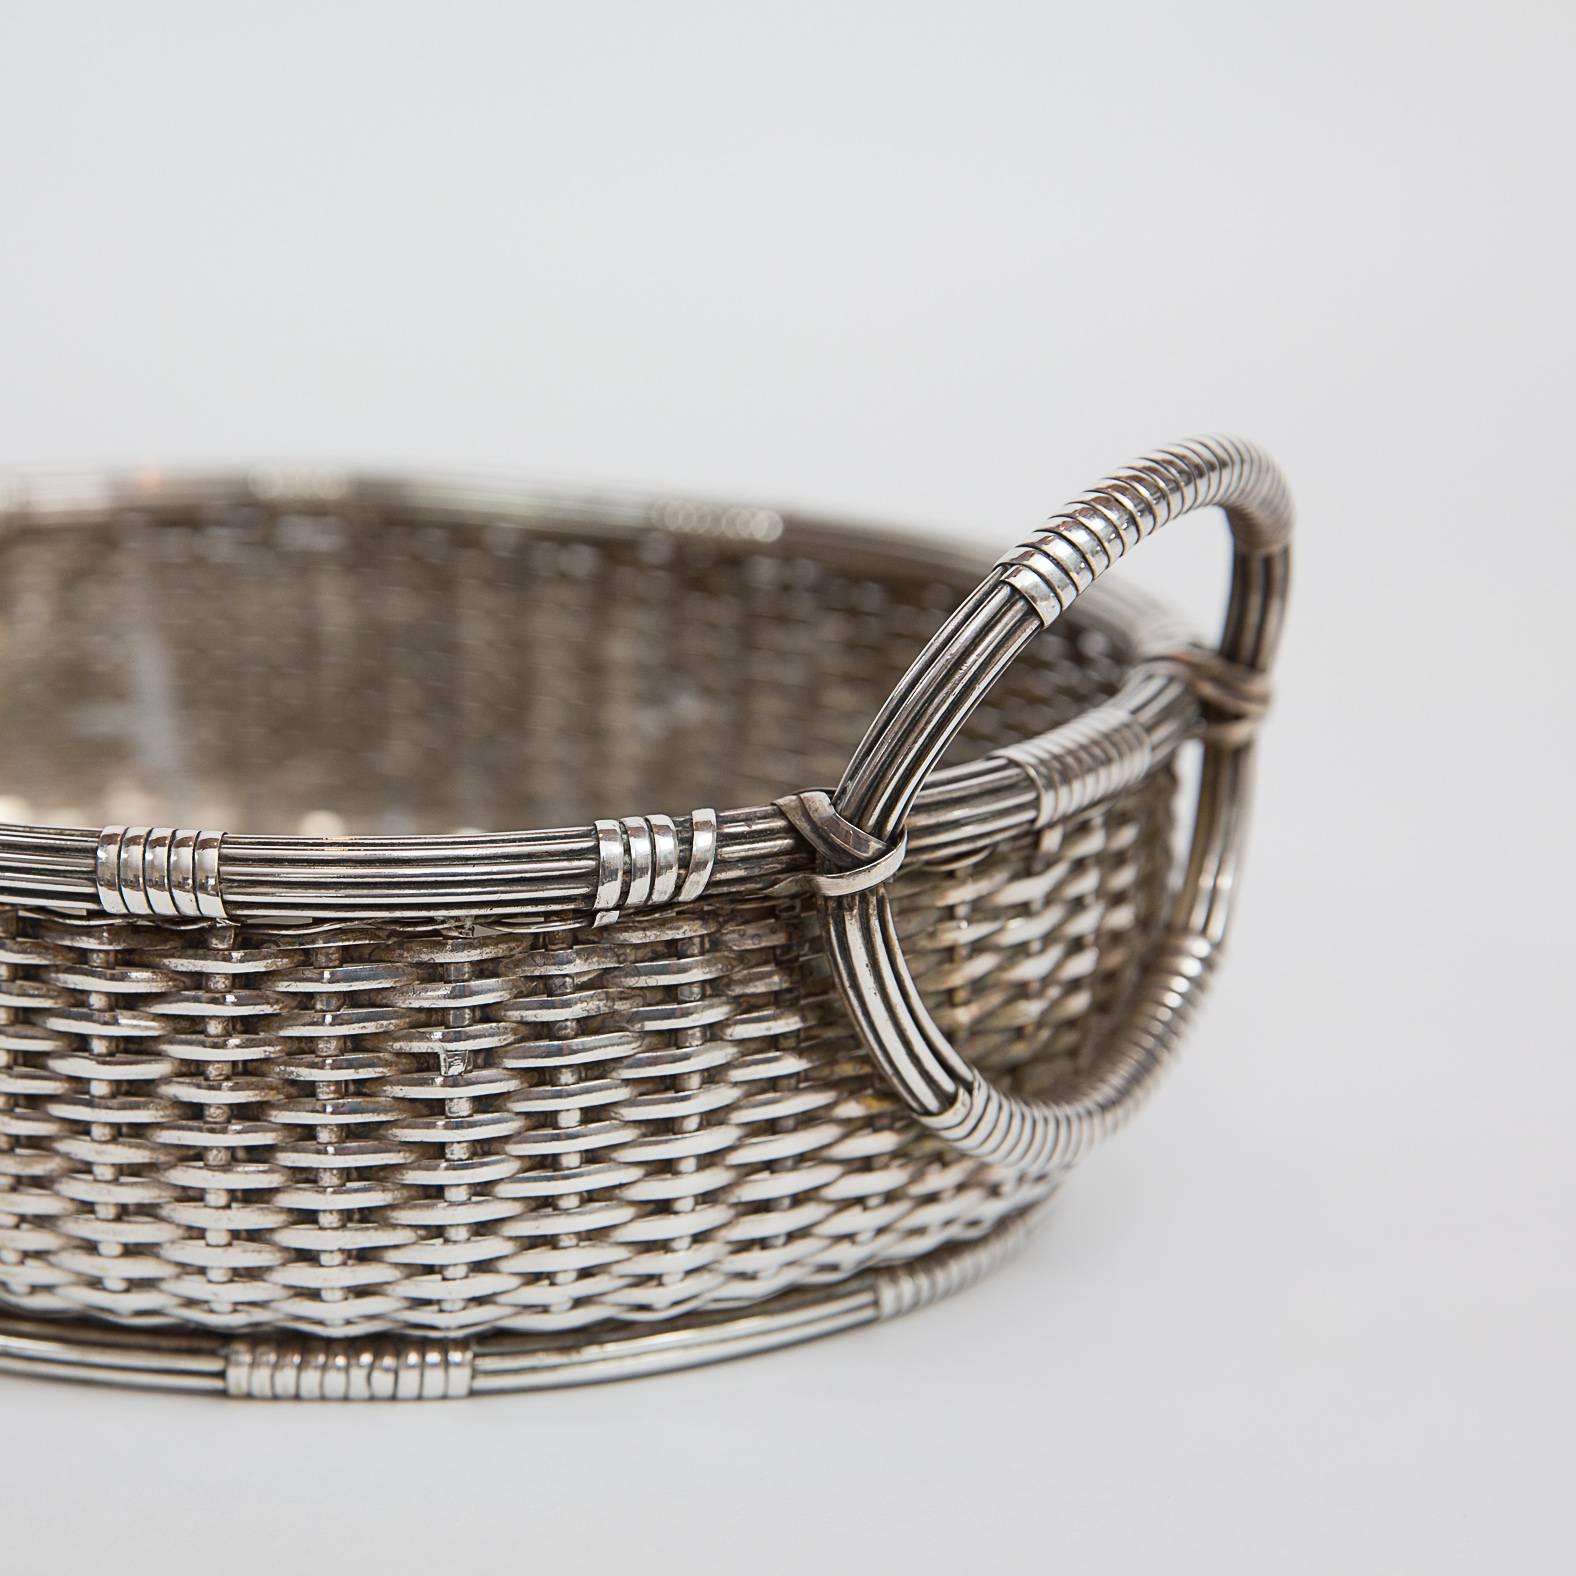 A french silvered brass bread or jewels basket - circa 1900 -
Free Christmas delivery guaranteed by Fed-Ex Priority for order completed before wednesday December 16.
